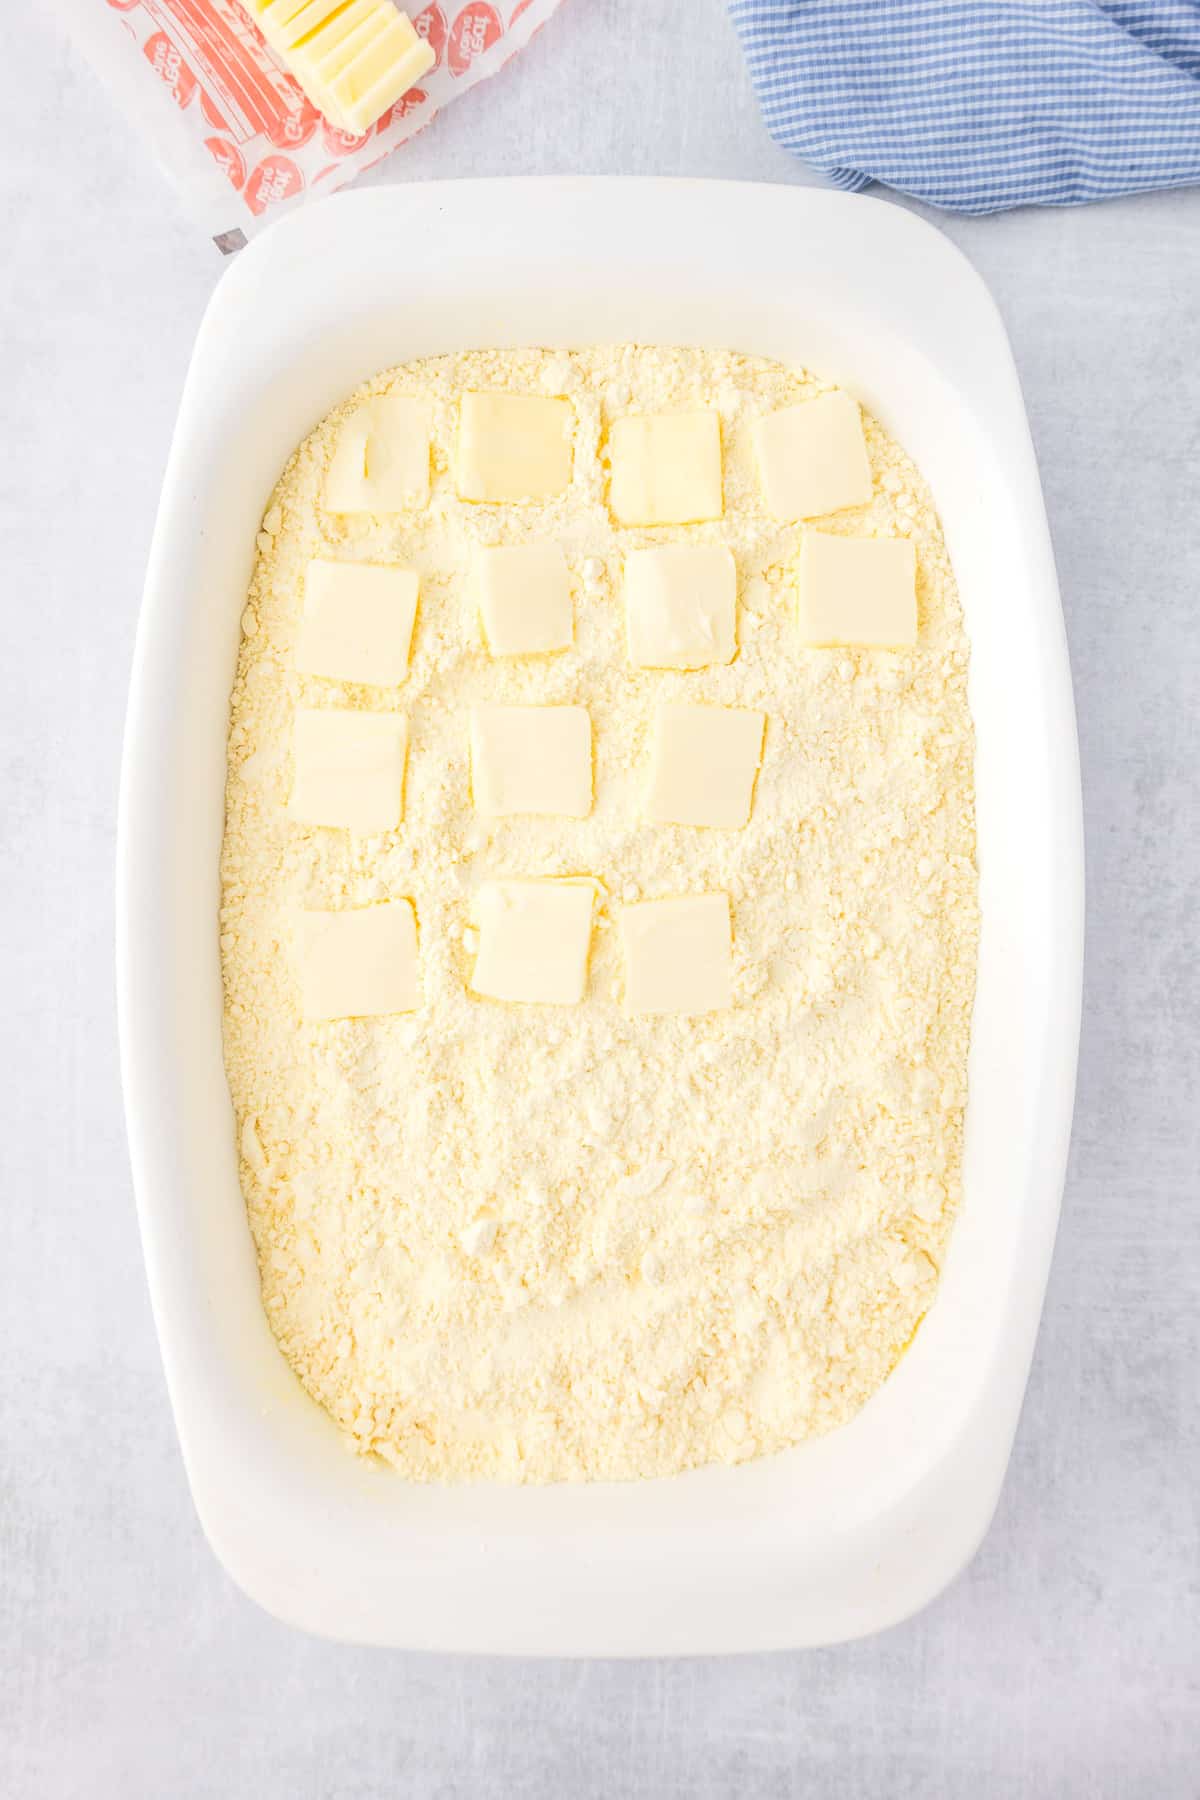 Butter squares on top of fry cake mix and other lemon dump cake layers in a pan.